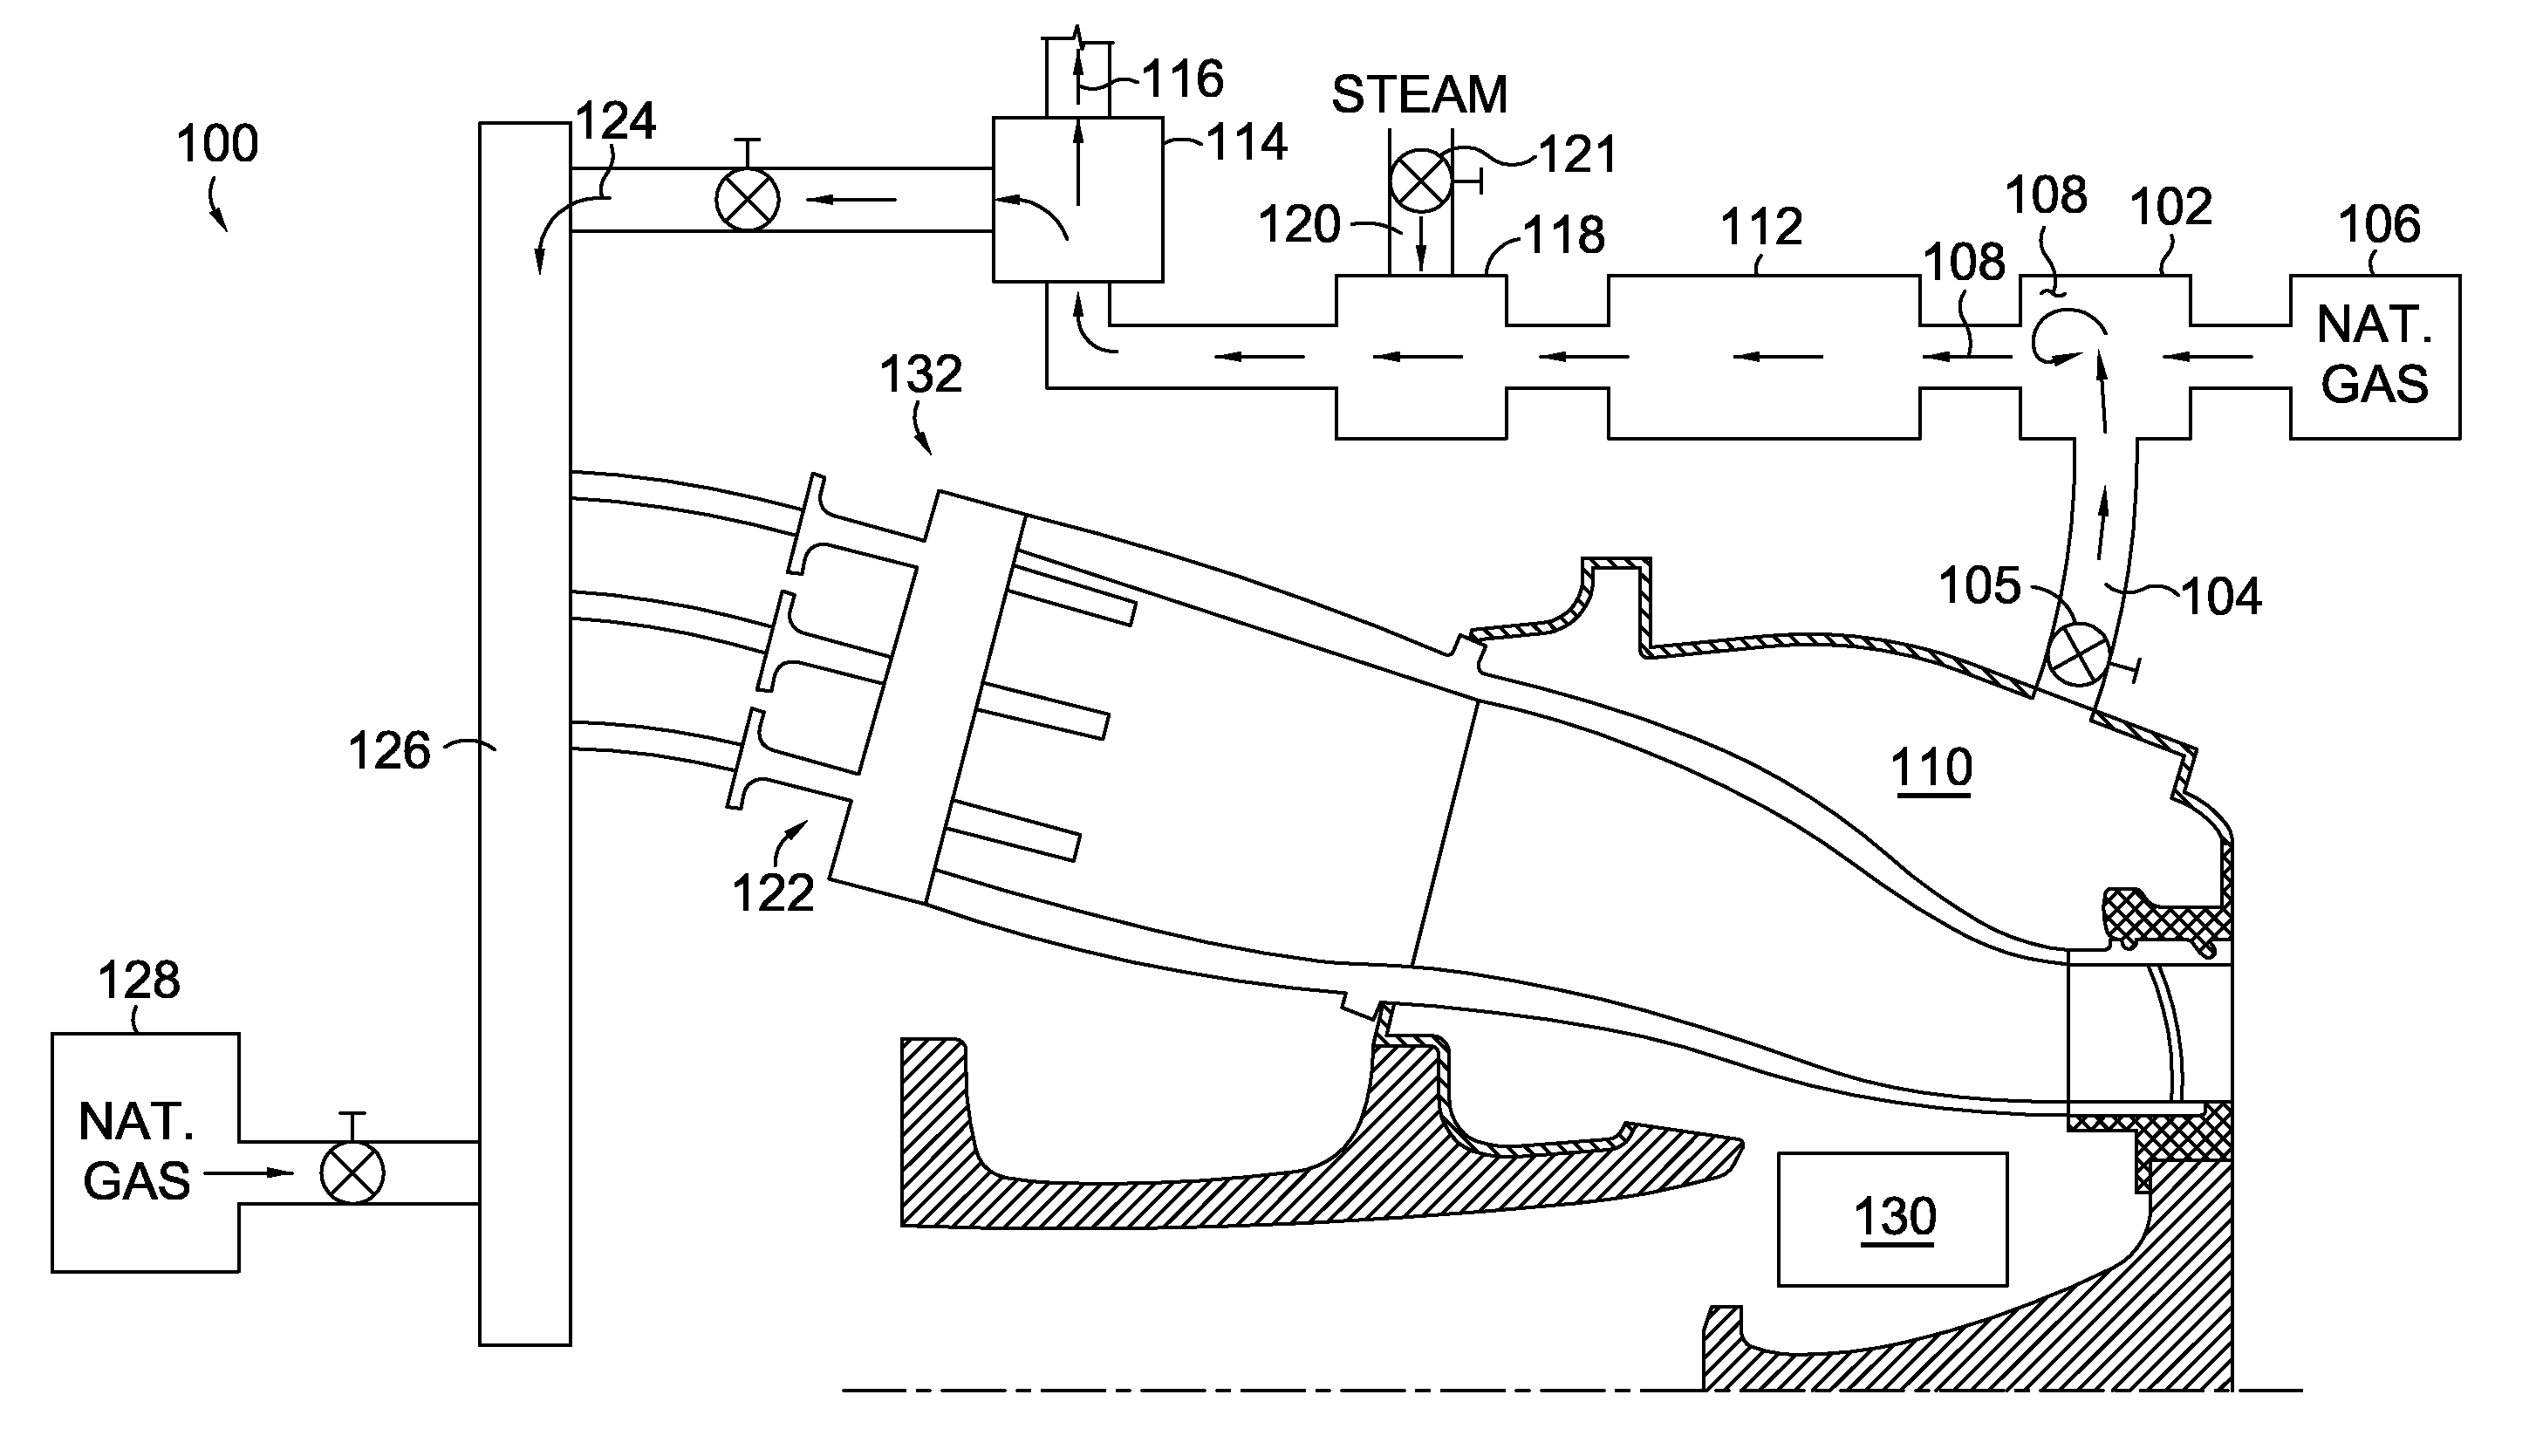 Gas turbine integrated with fuel catalytic partial oxidation